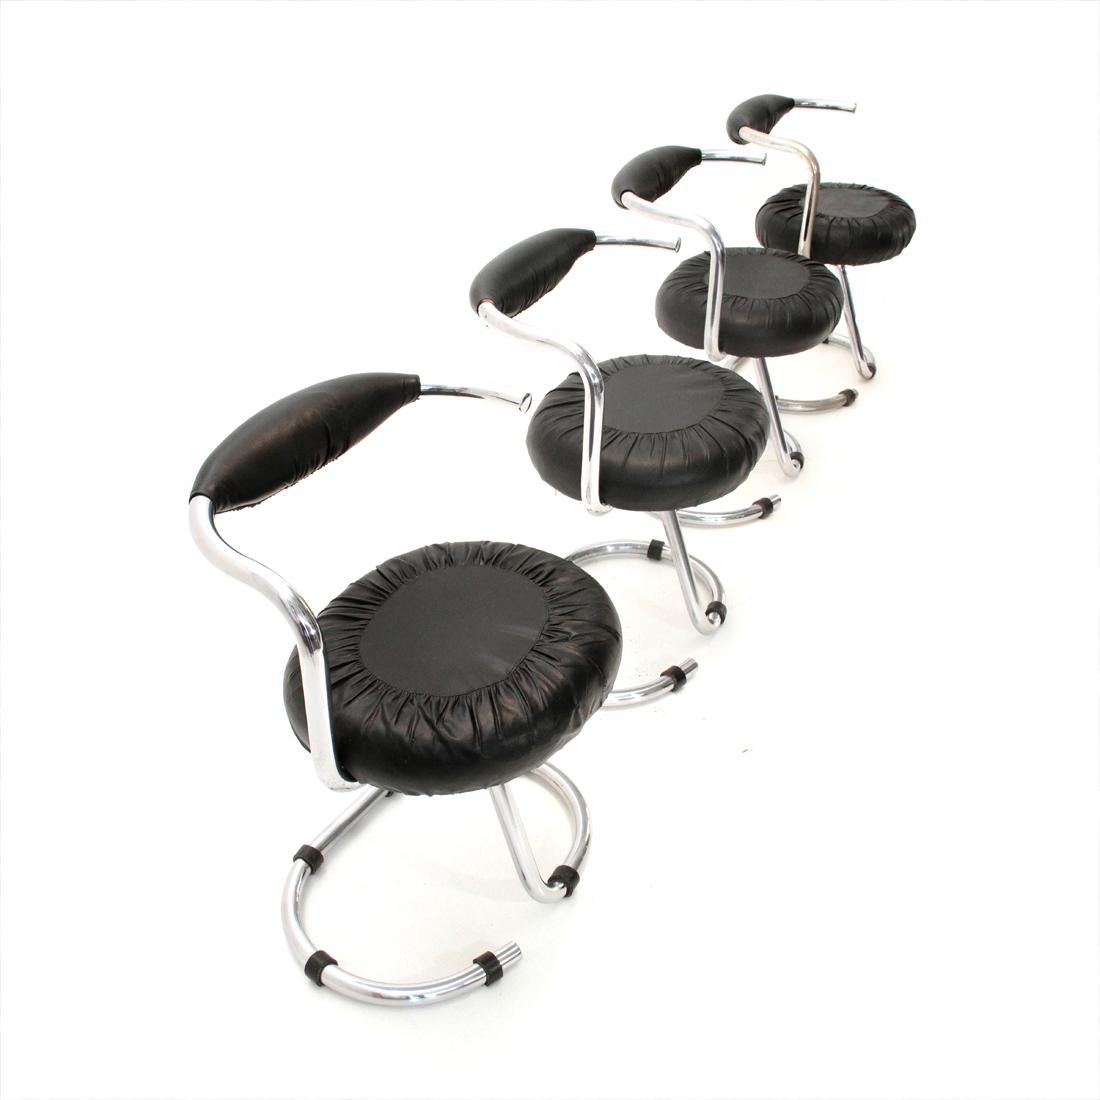 Four Italian 1970s manufacturing chairs designed by Giotto Stoppino.
Chromed metal frame
Black faux leather seat and back.
Good general conditions, some signs due to normal use over time.

Dimensions: Length 58 cm, depth 50 cm, height 77 cm,